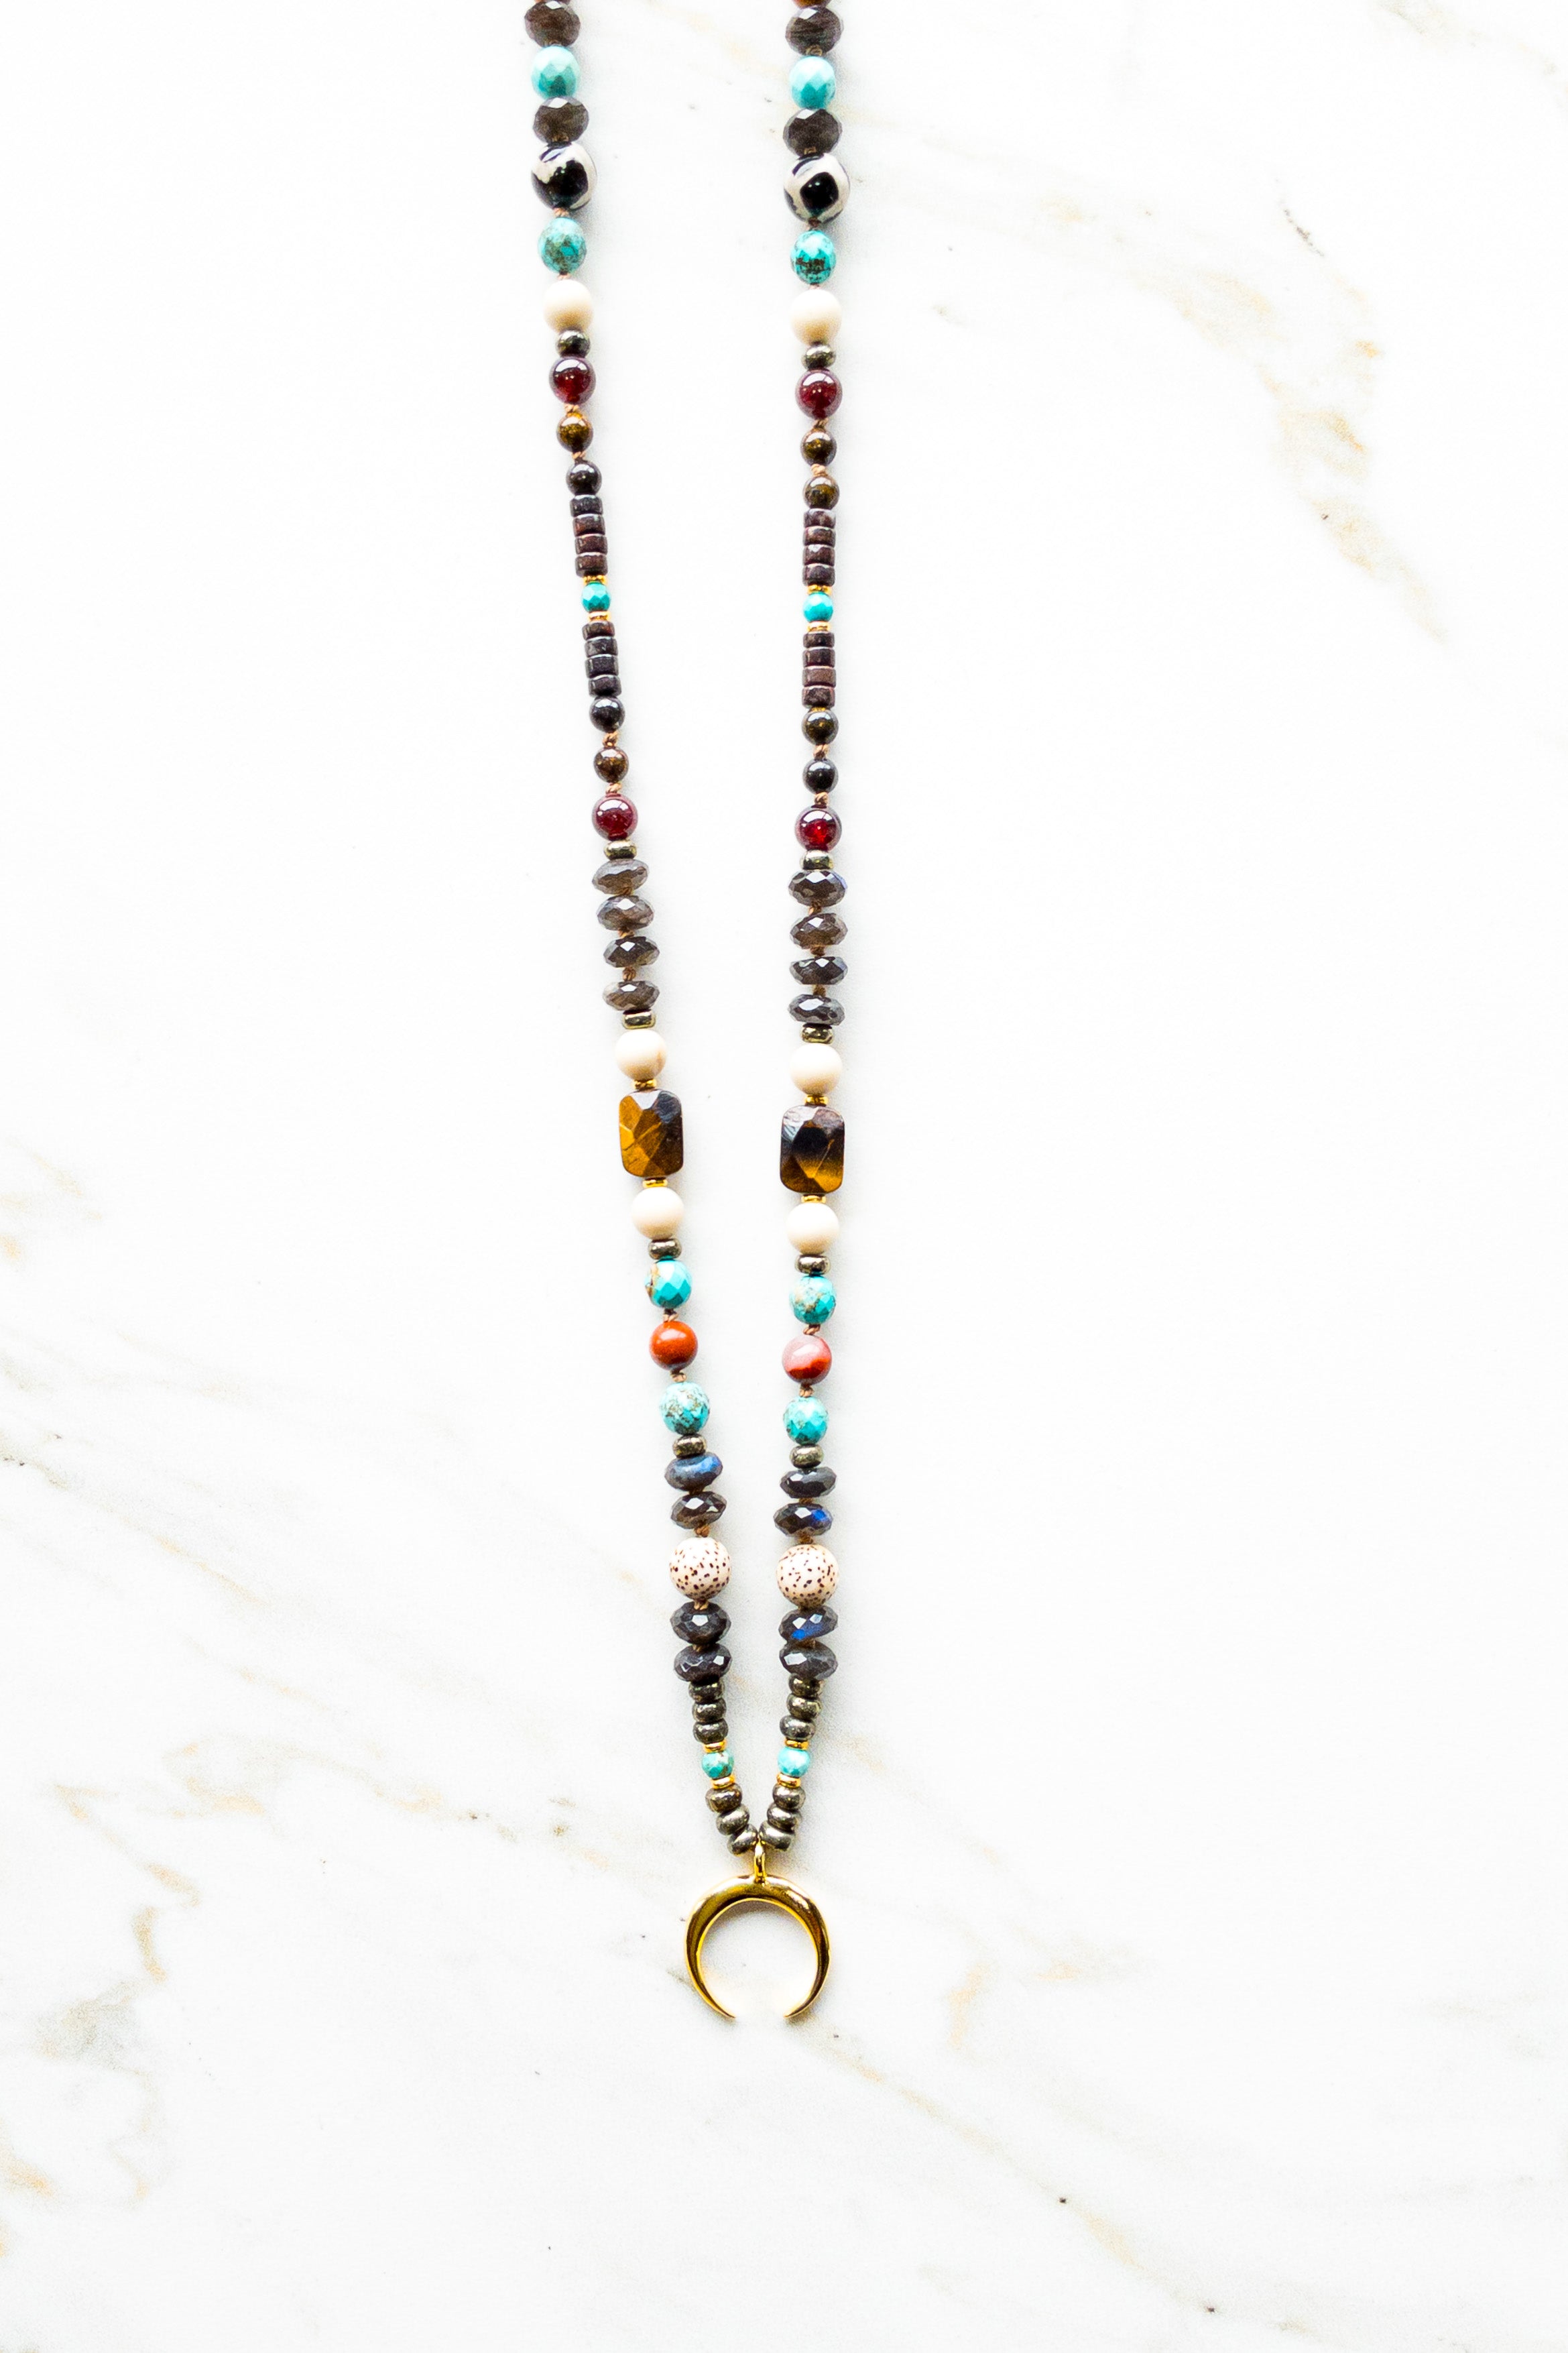 Goddess Mala Necklace: Divine Energy and Serenity - Indradhanush Collection - shashā India inspired jewellery 